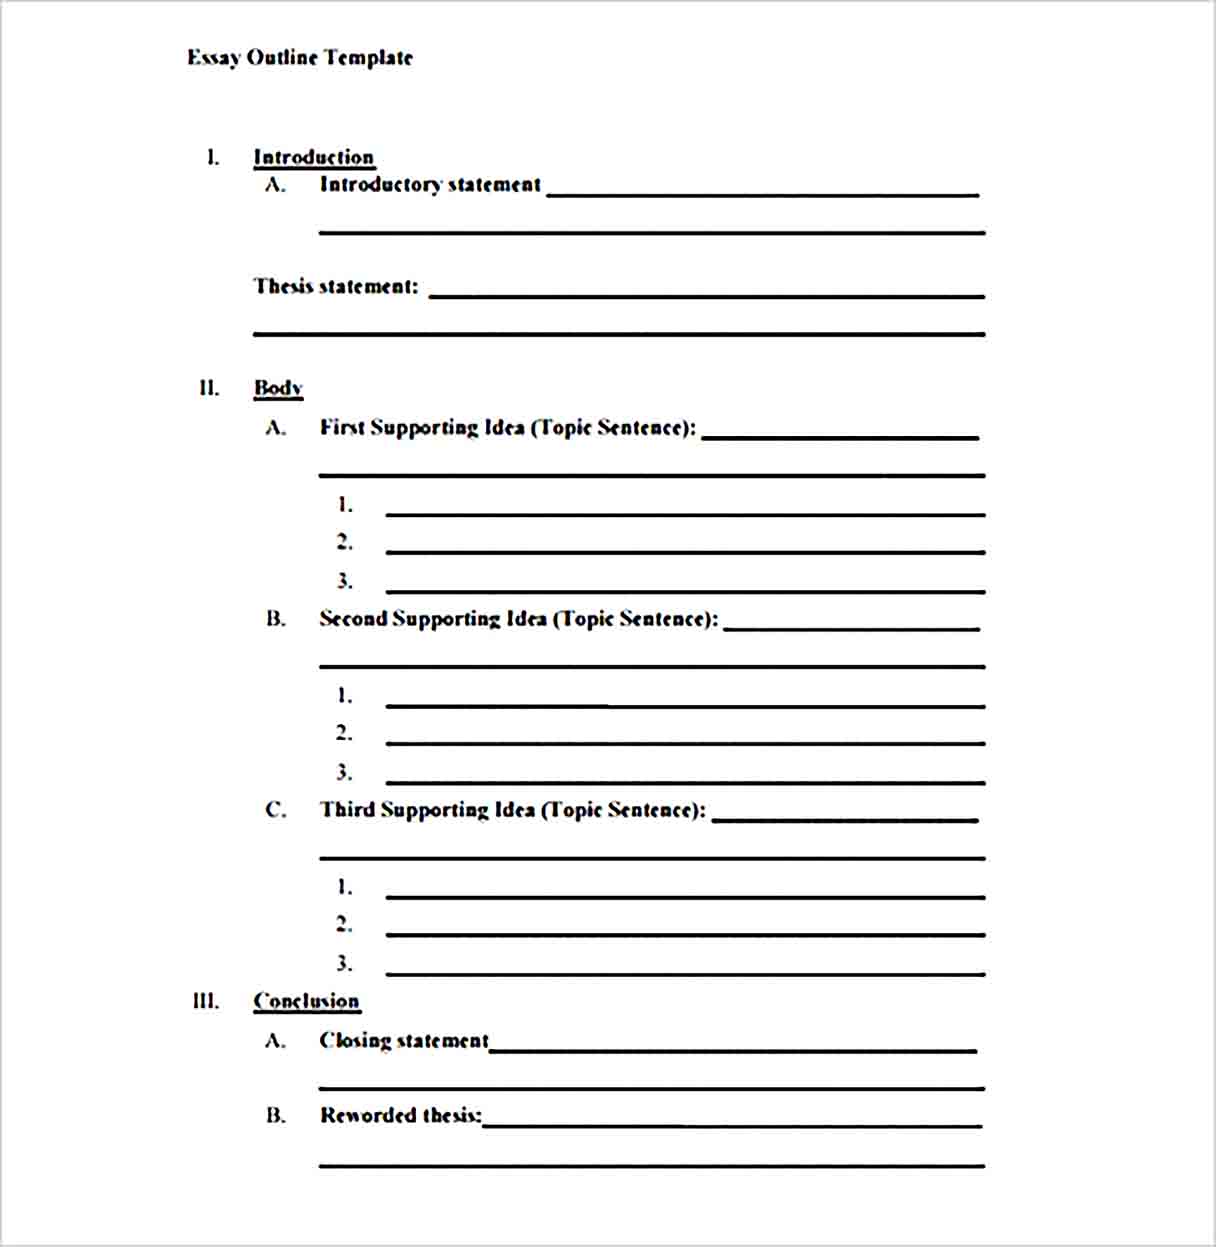 Blank Research Paper Outline Template from uroomsurf.com